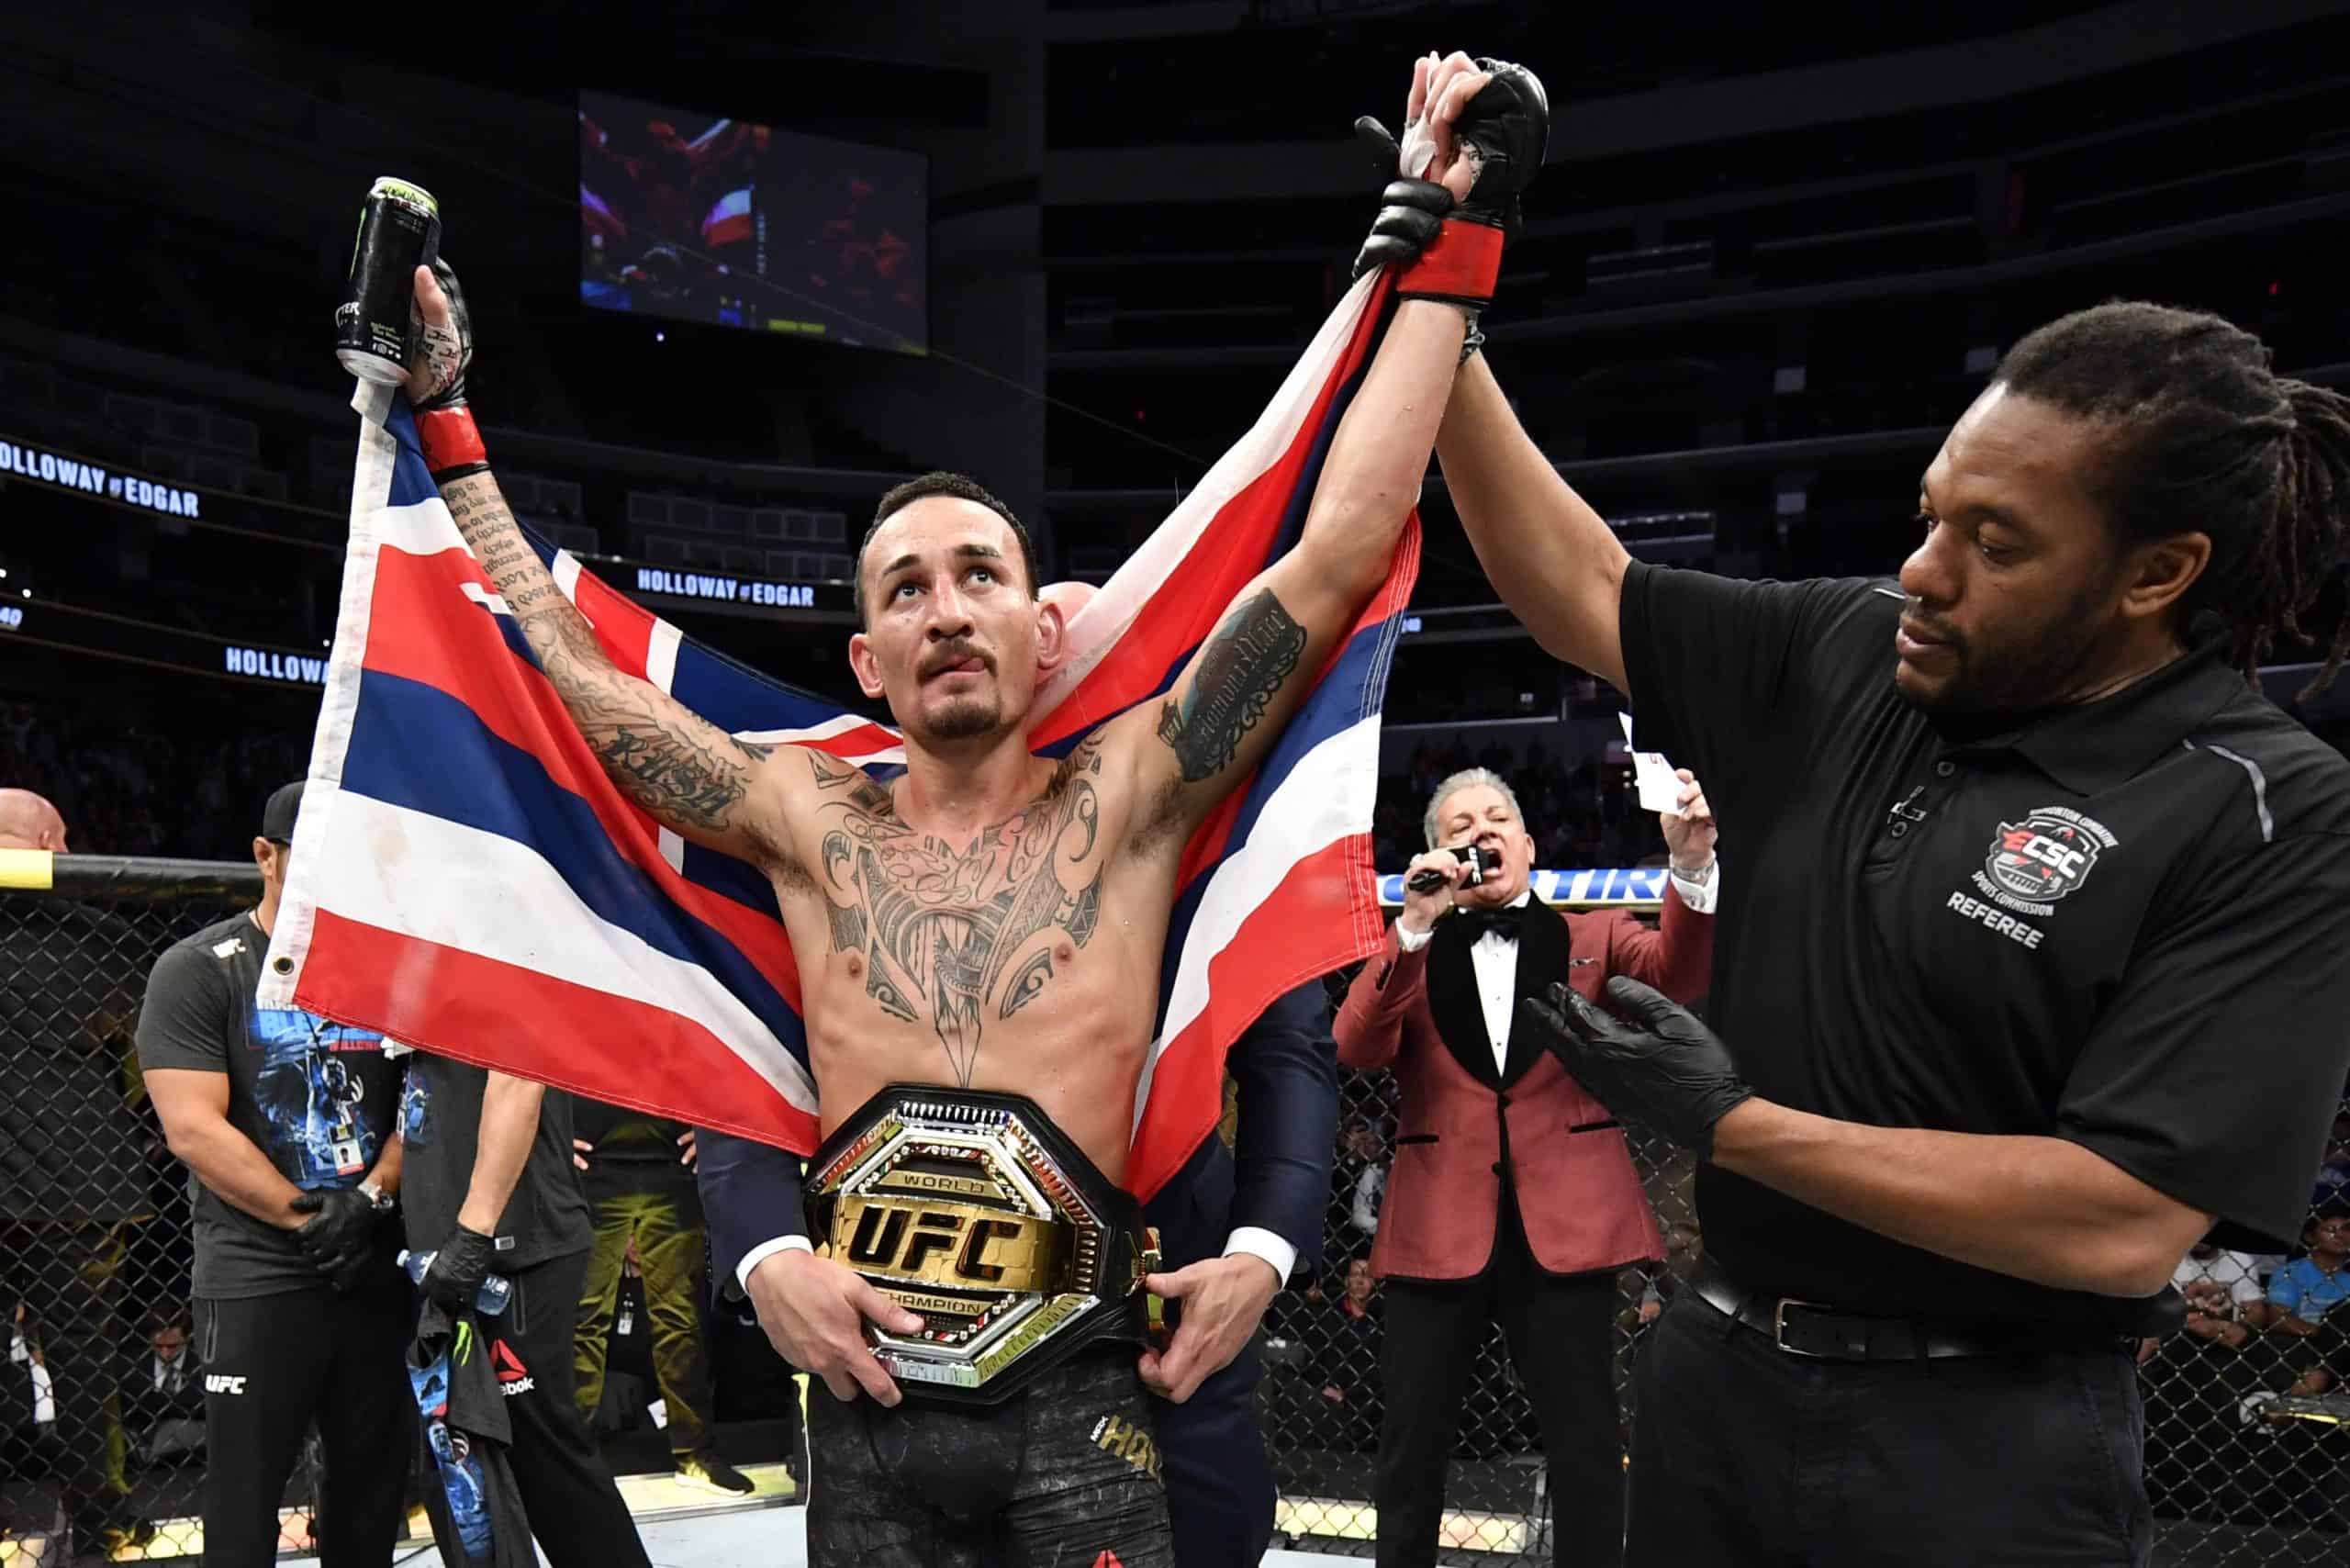 Max Holloway respect the national flag as well